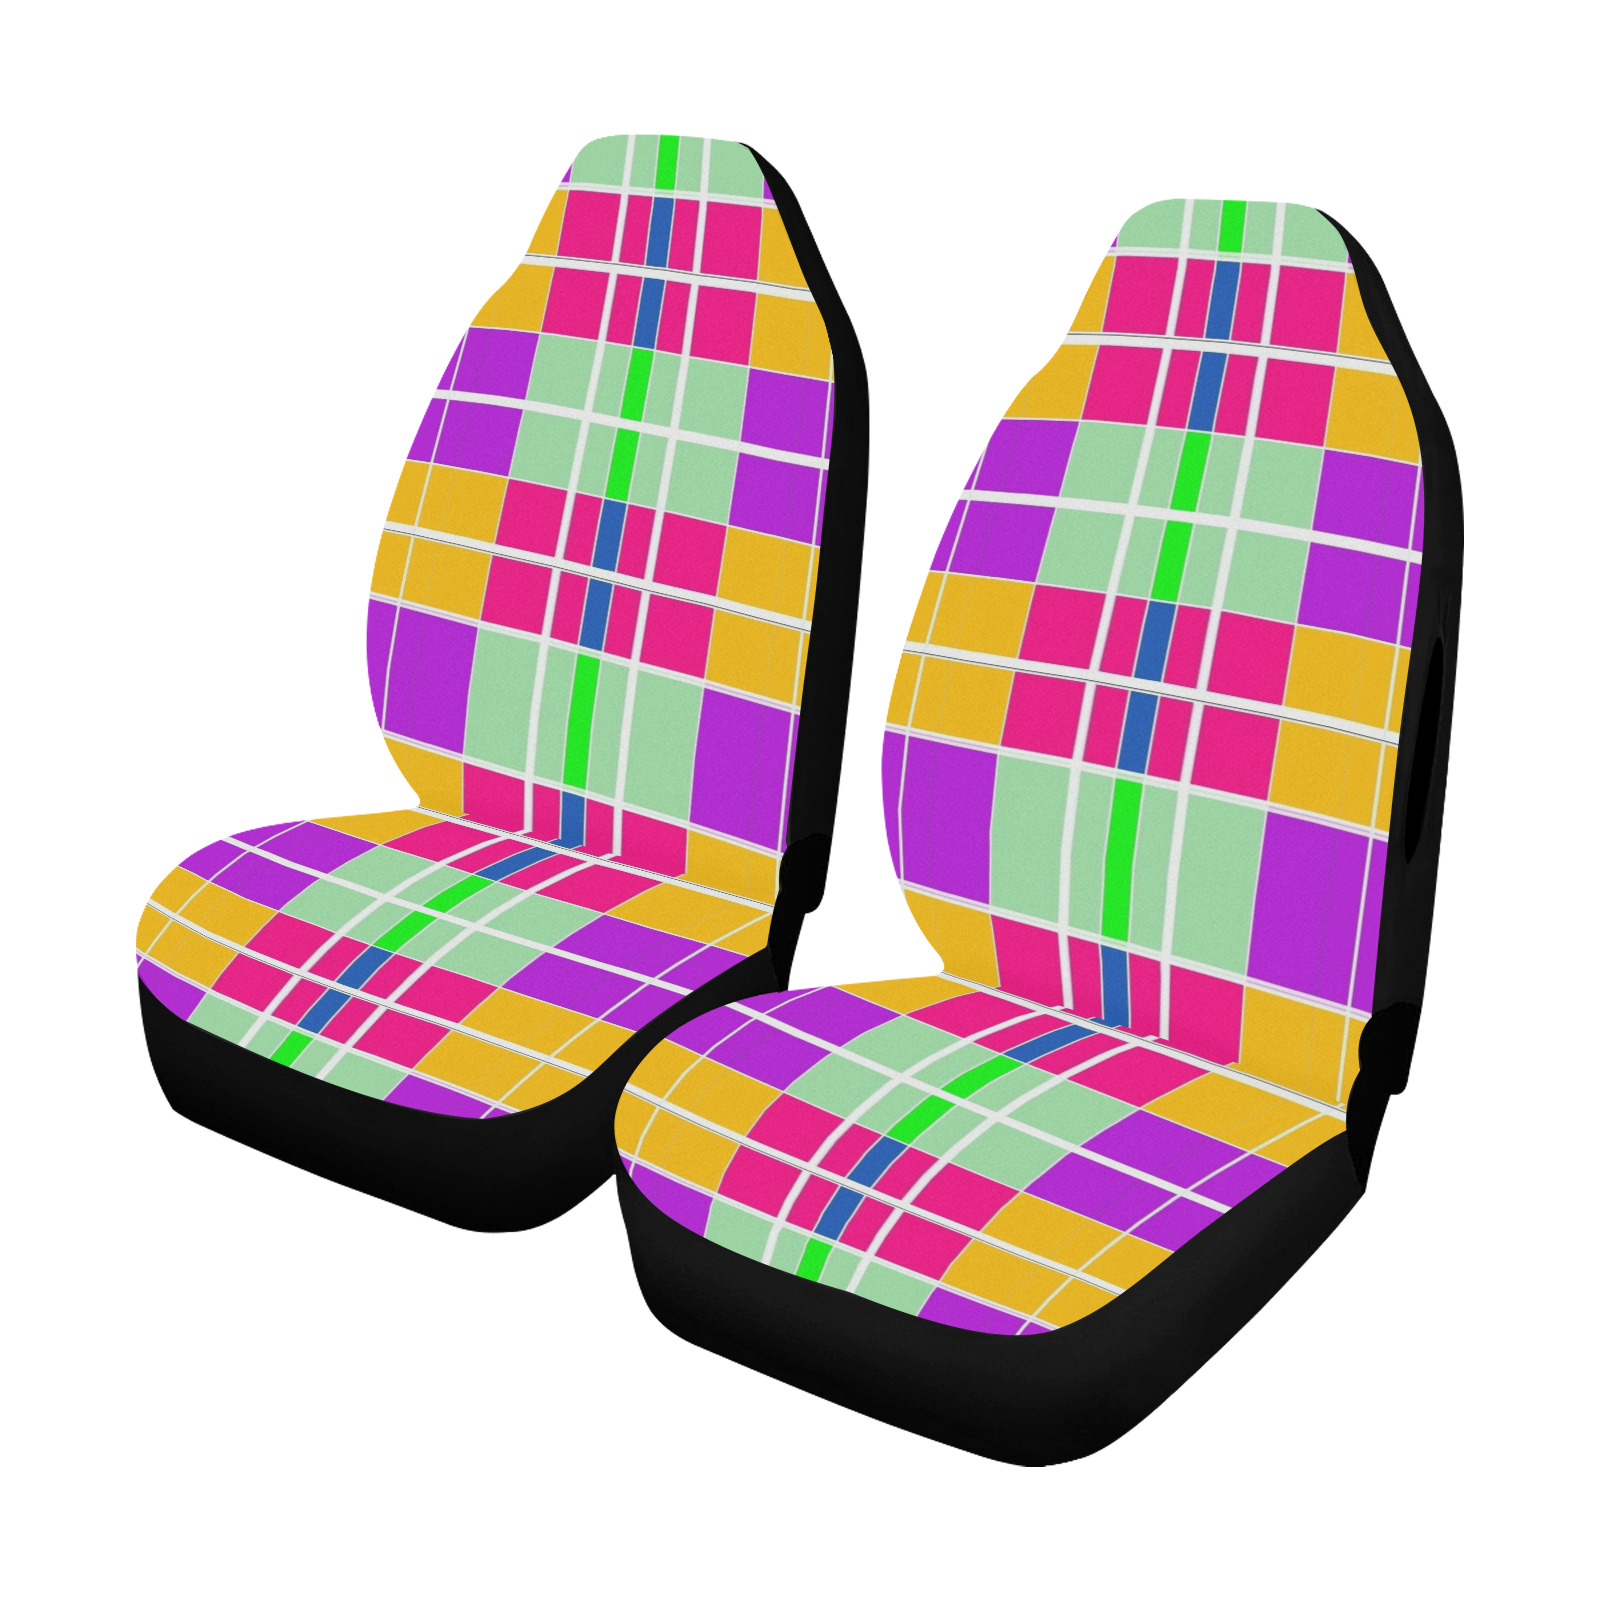 Fractoberry Bright Colors 020 Car Seat Cover Airbag Compatible (Set of 2)